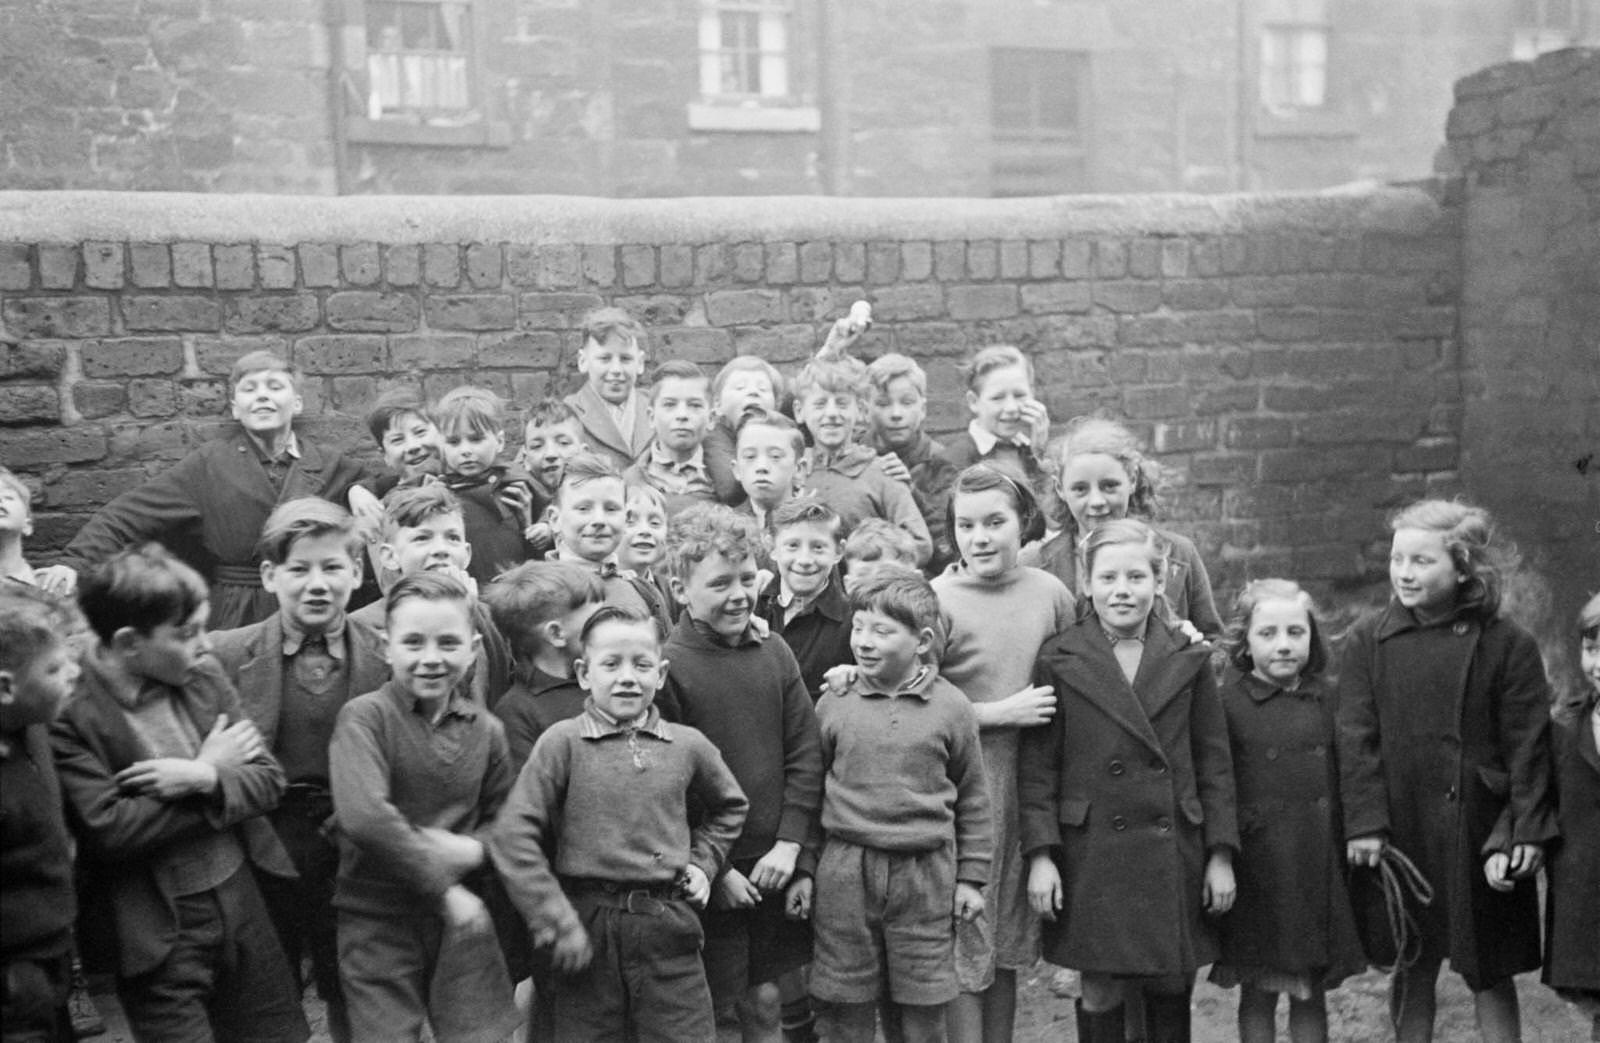 Boys and girls pose for the camera in the Gorbals, a slum district of Glasgow, 1948.